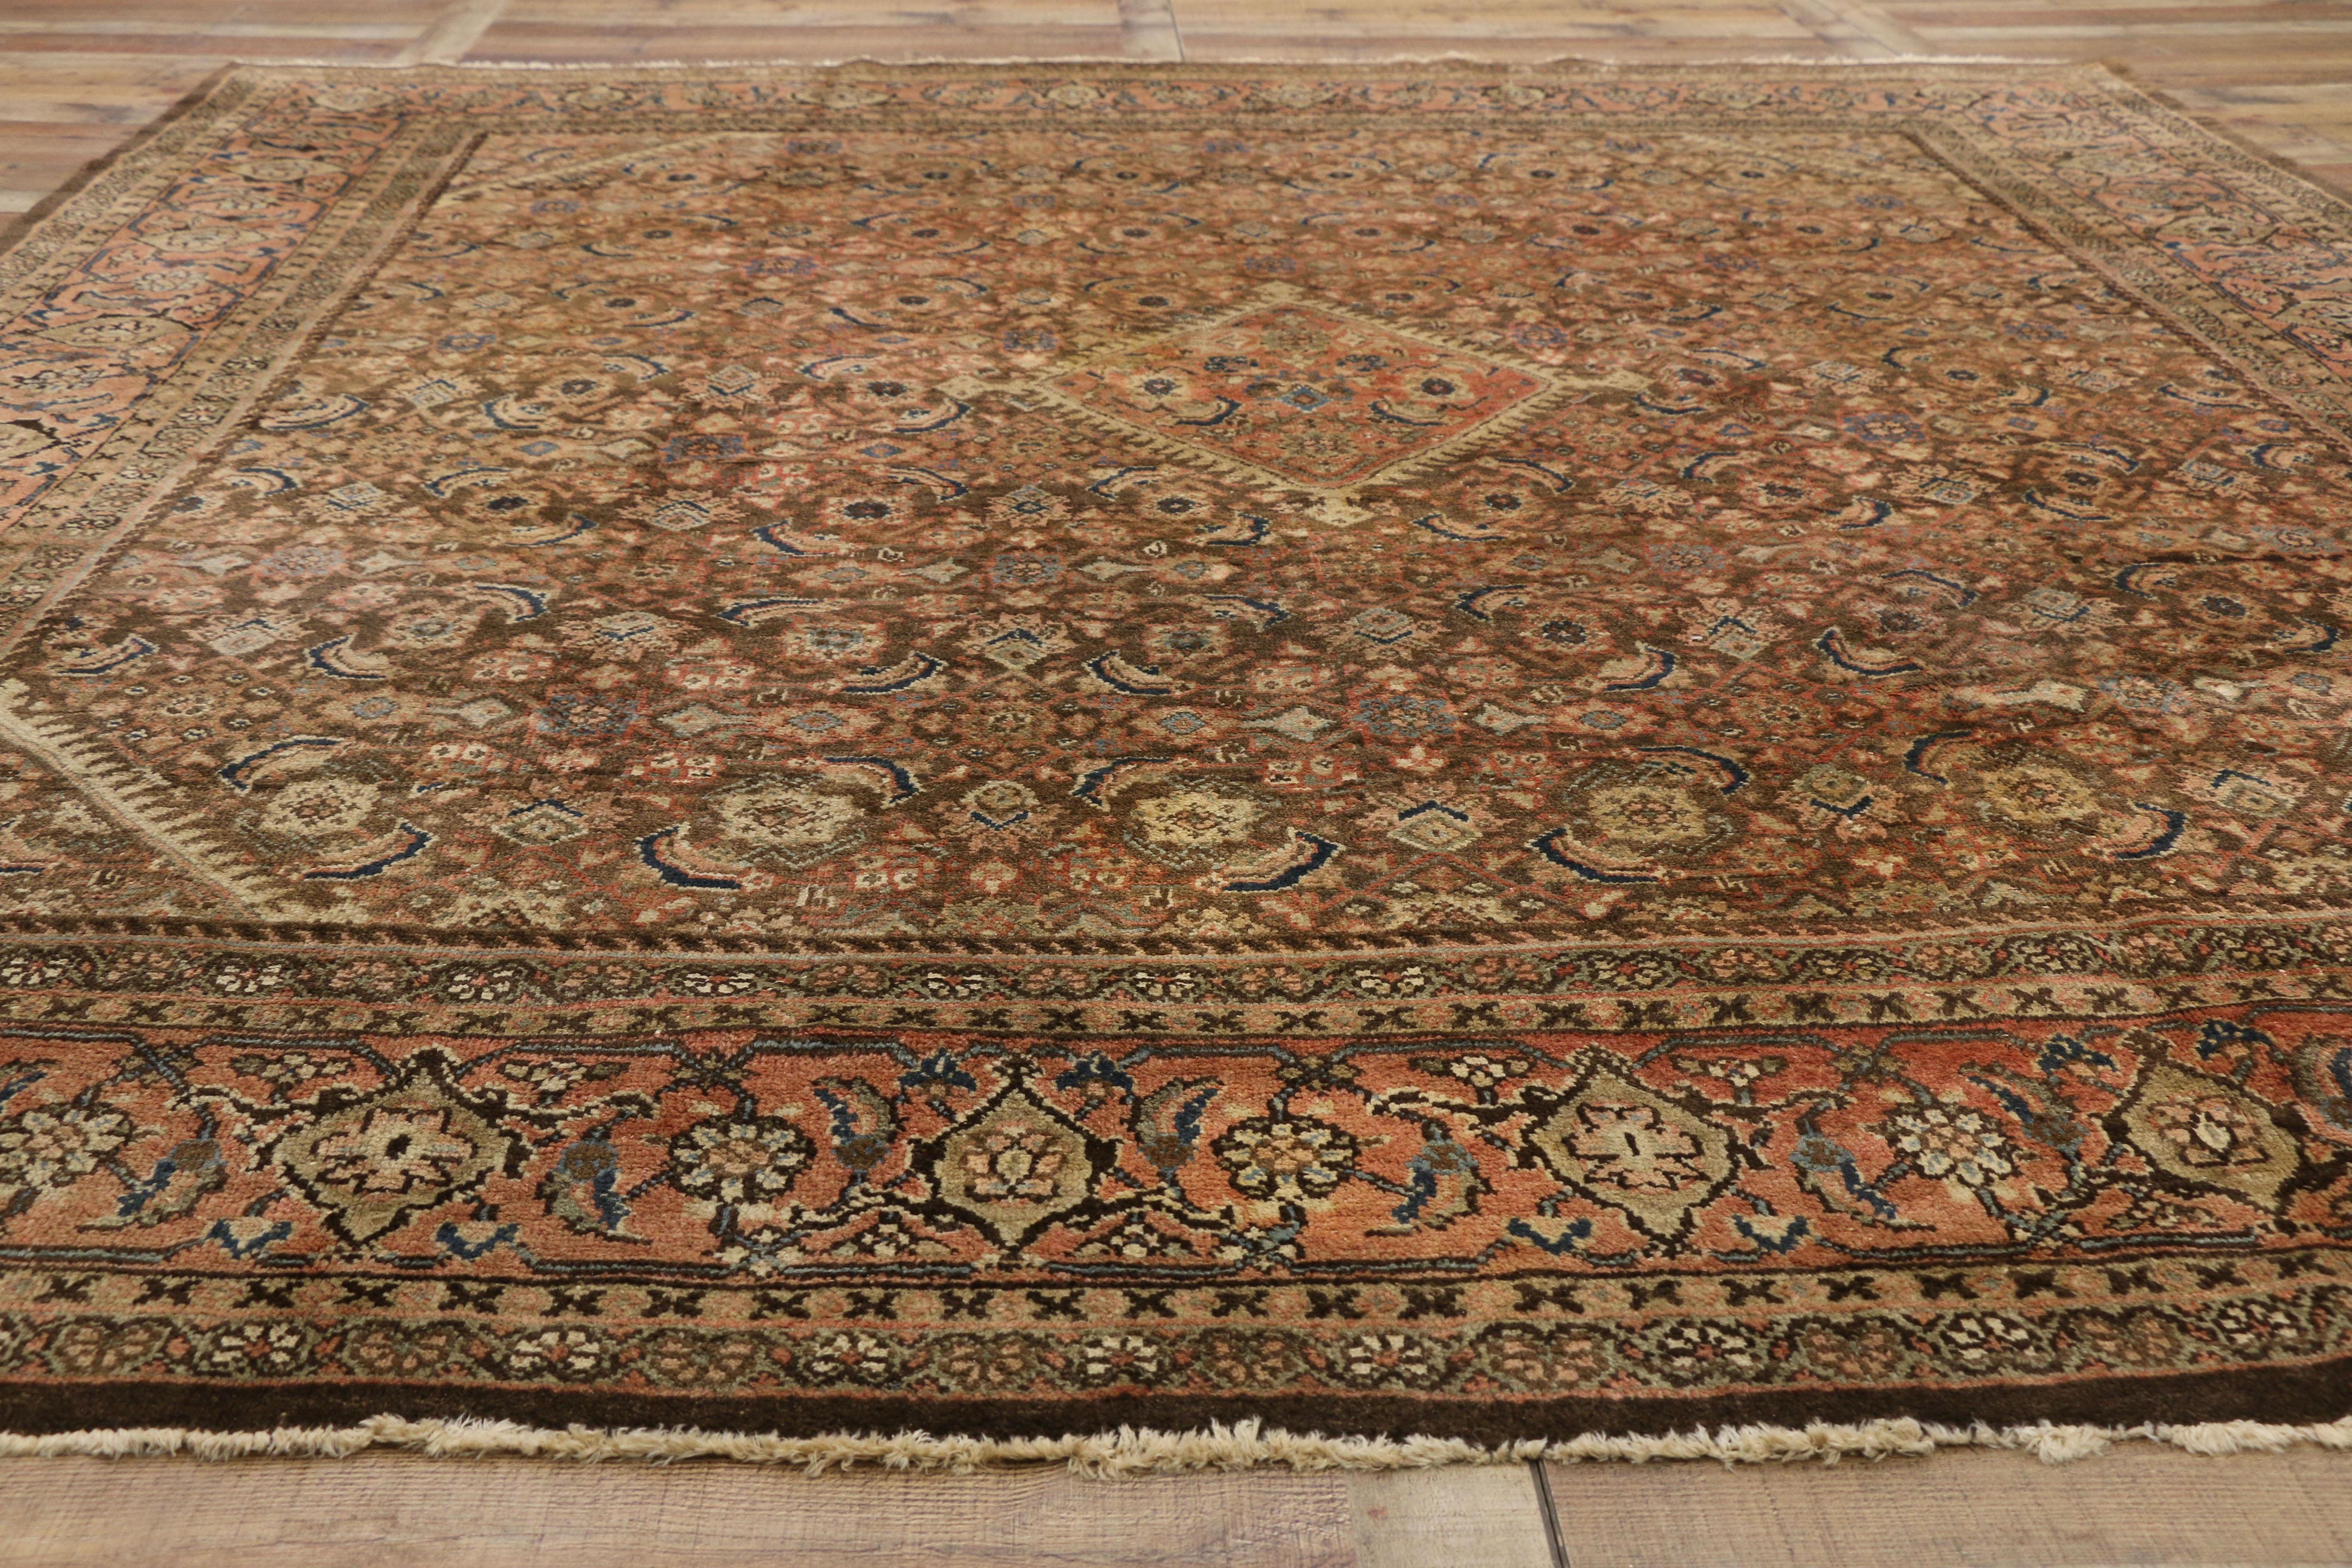 Hand-Knotted Vintage Persian Mahal Rug with English Country Cottage Style